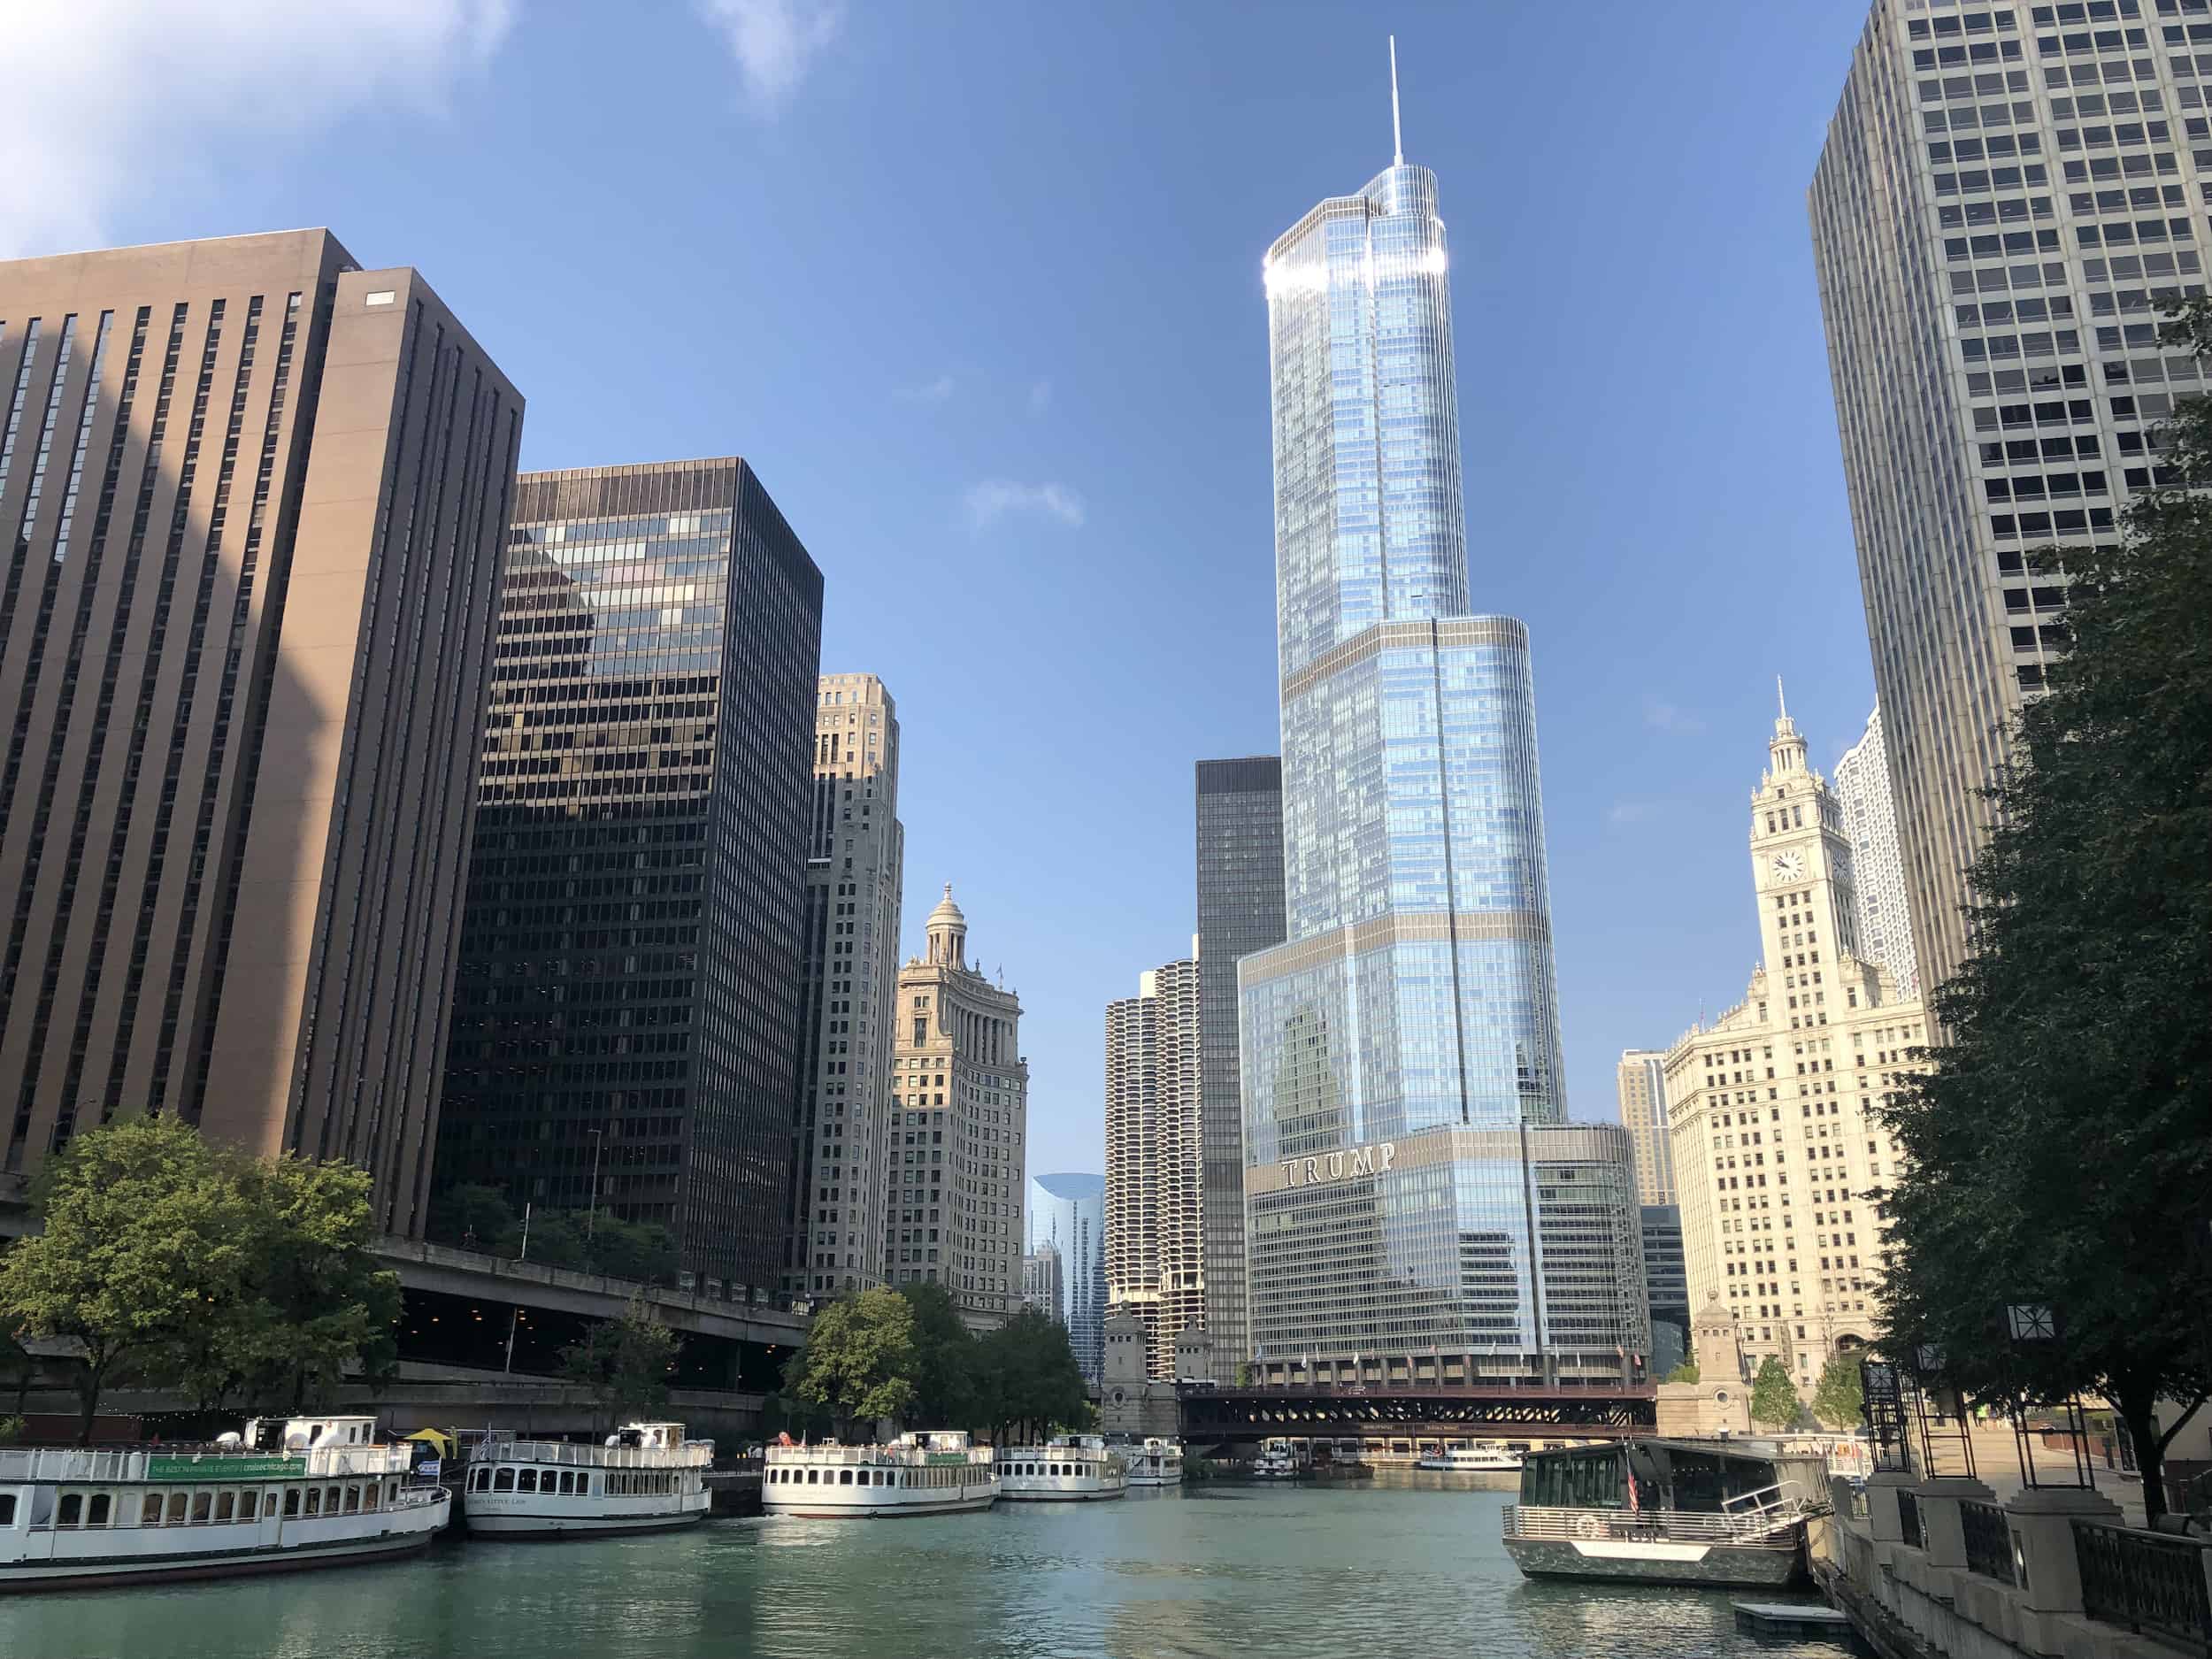 View from the River Esplanade in Chicago, Illinois